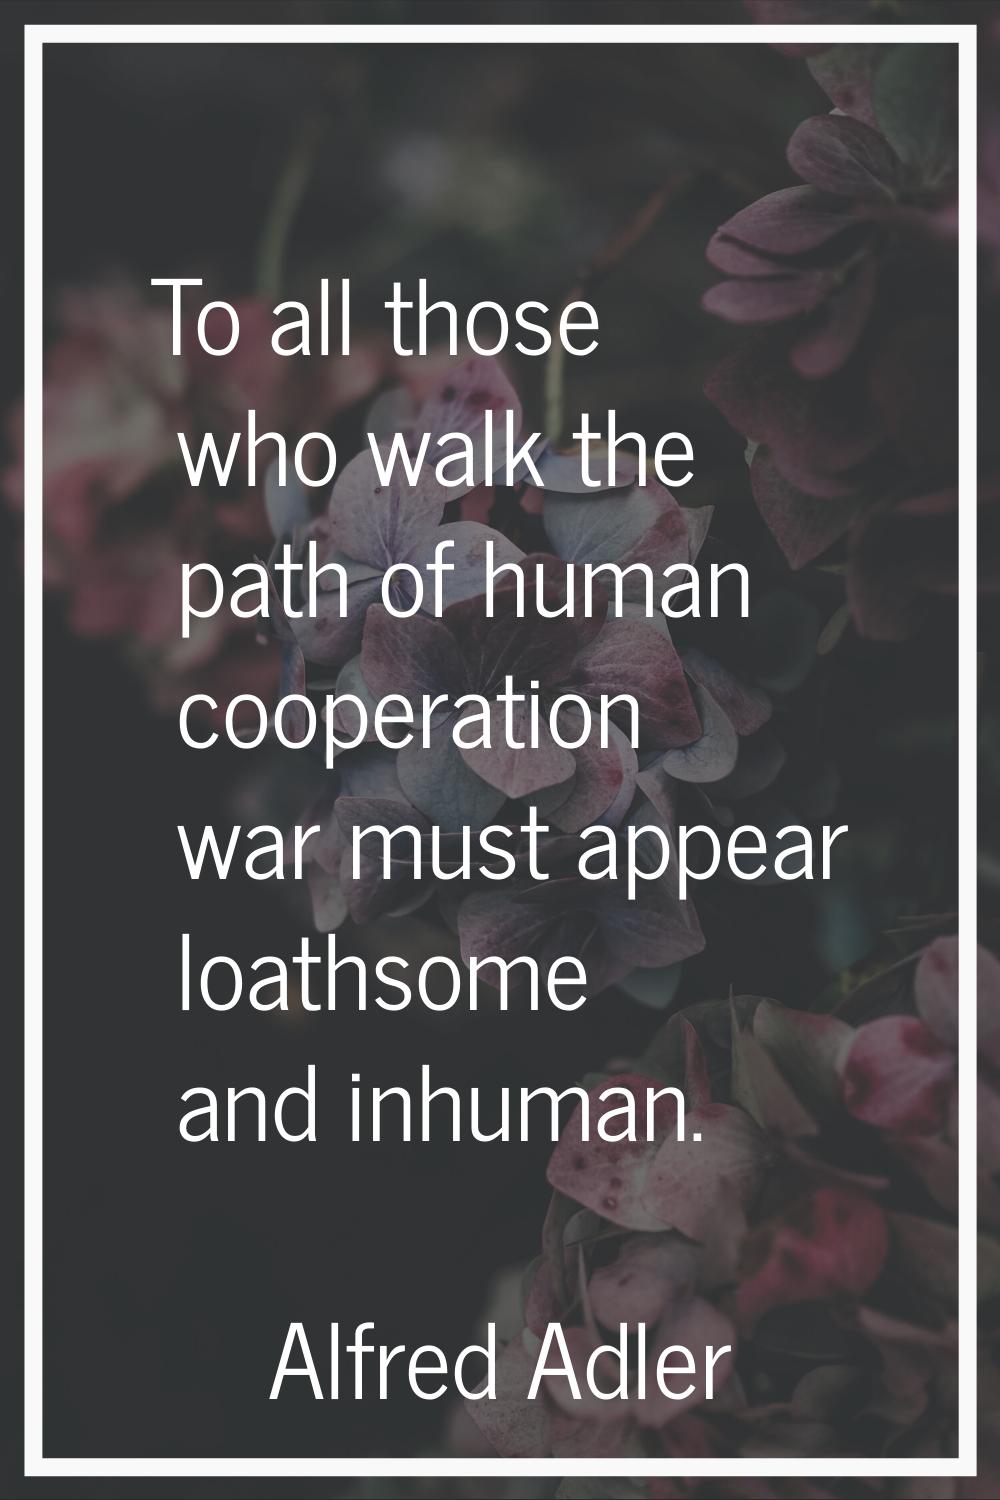 To all those who walk the path of human cooperation war must appear loathsome and inhuman.